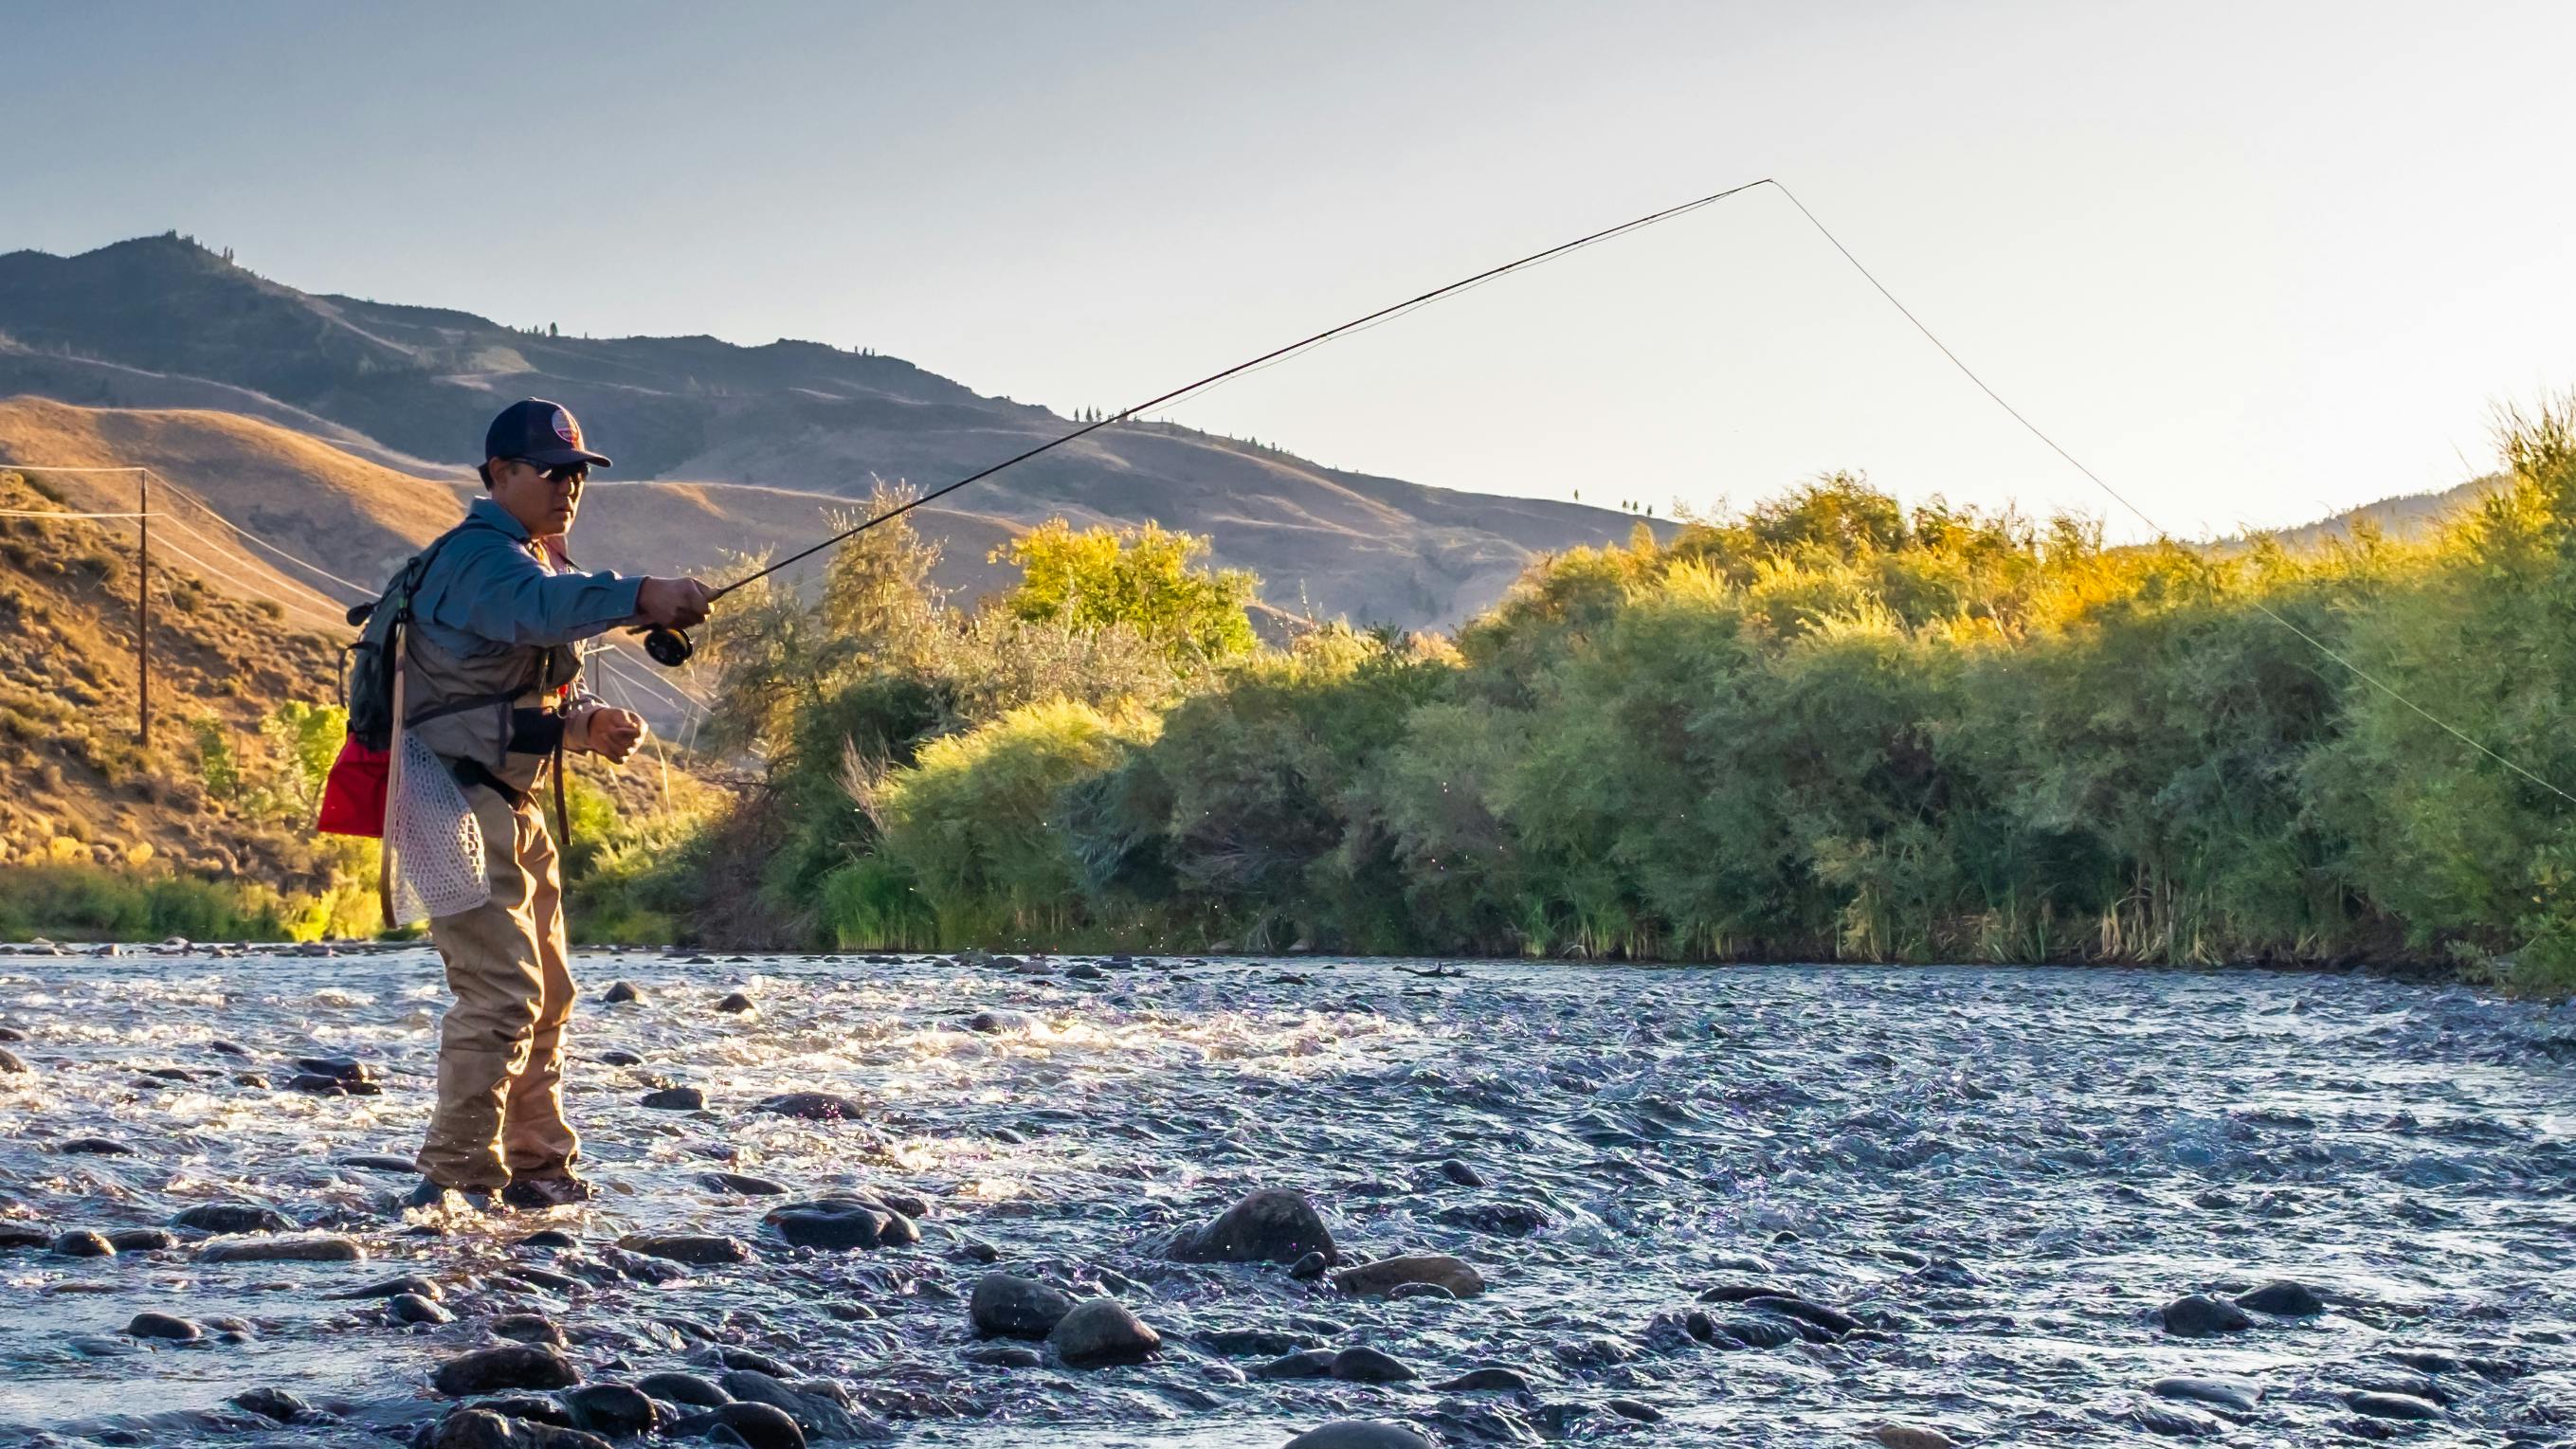 A man casts a fly fishing rod while standing in a river